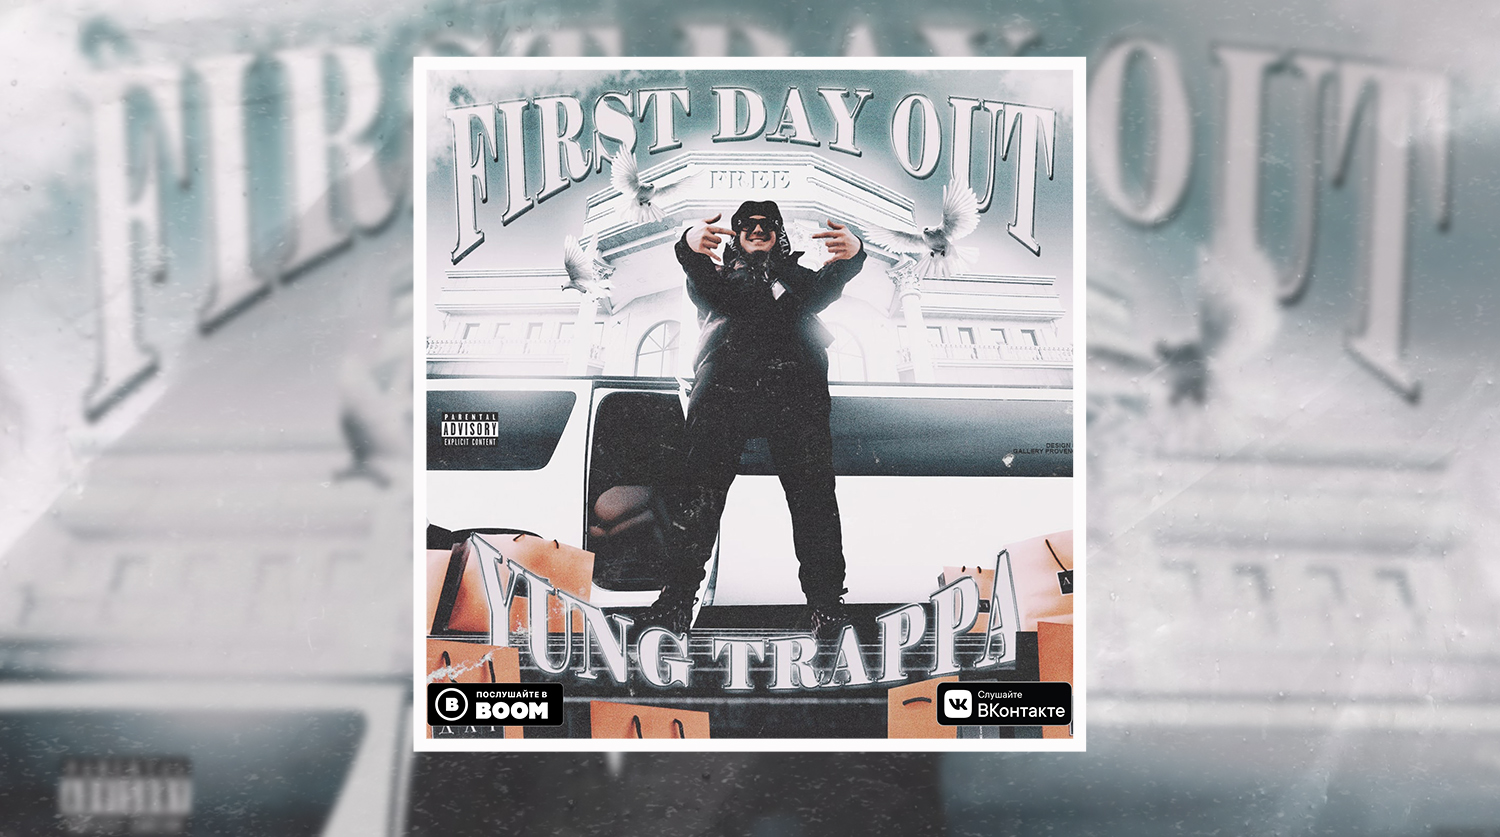 Дай аут. Ферст Дэй аут. First Day Yung Trappa. Yung Trappa first Day out. Yung Trappa first Day out фото.